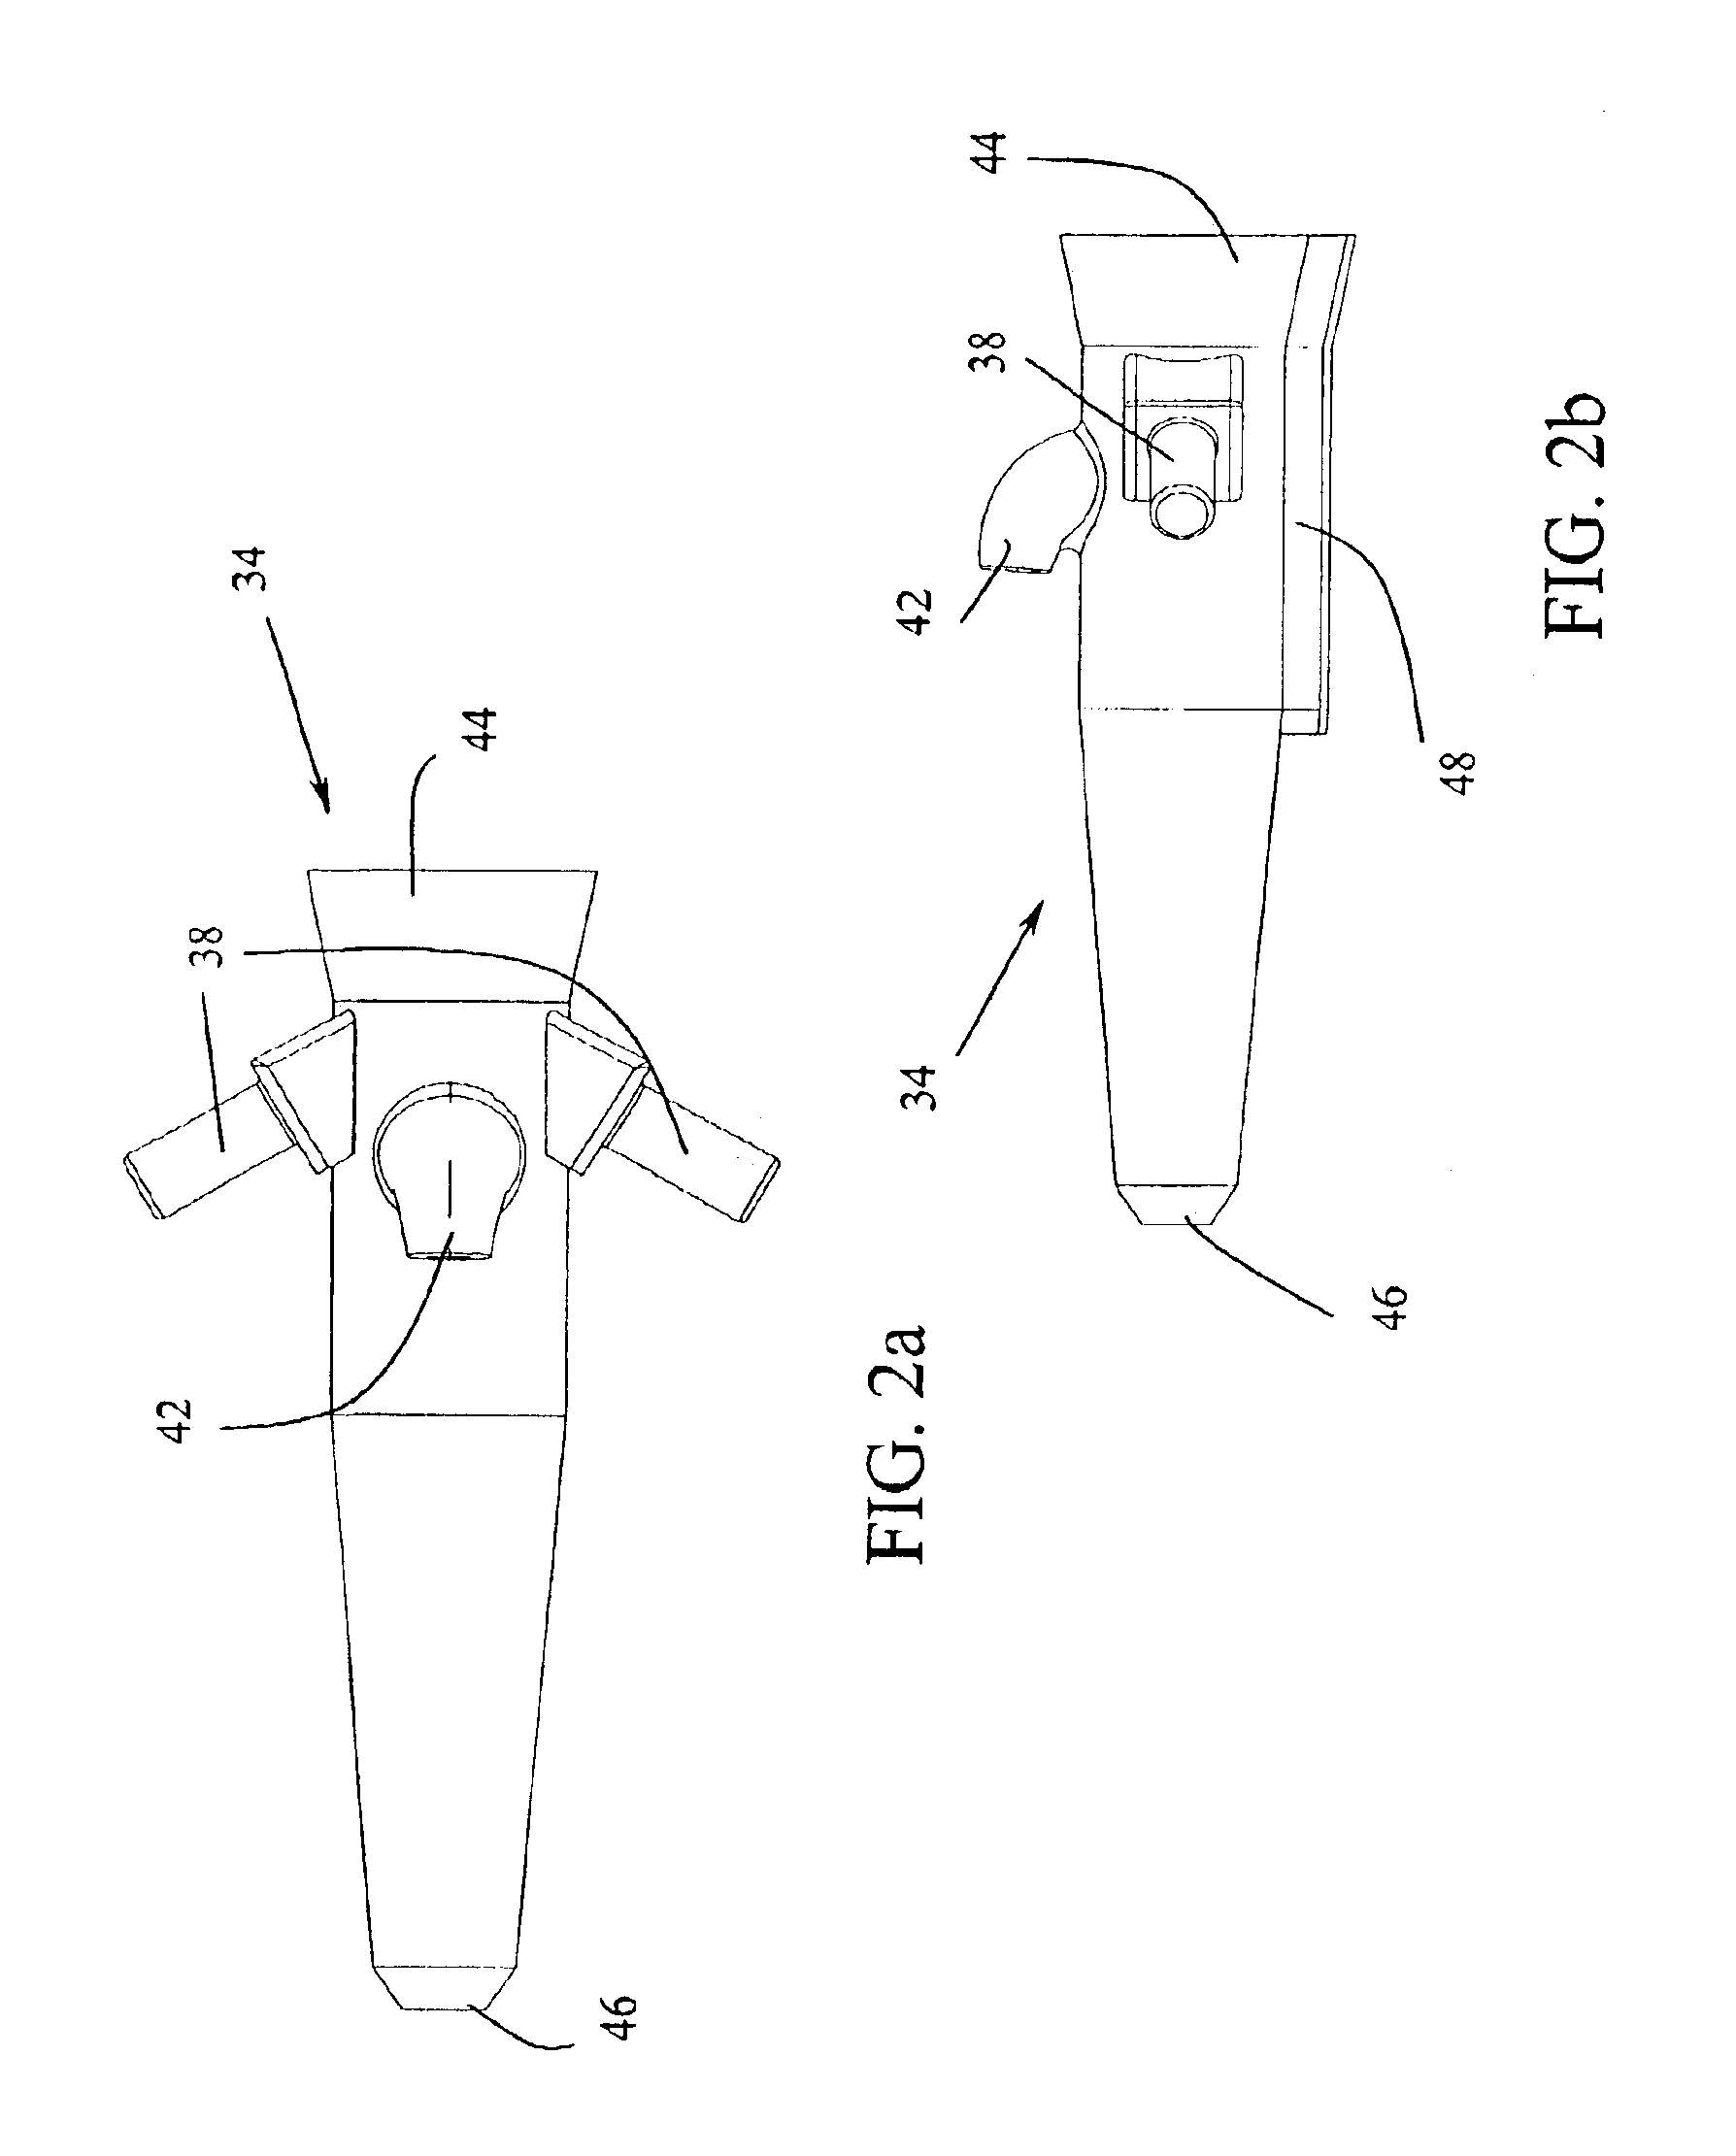 Method for transferring cryogenic liquids and associated cryogenic fill nozzle insulating boot